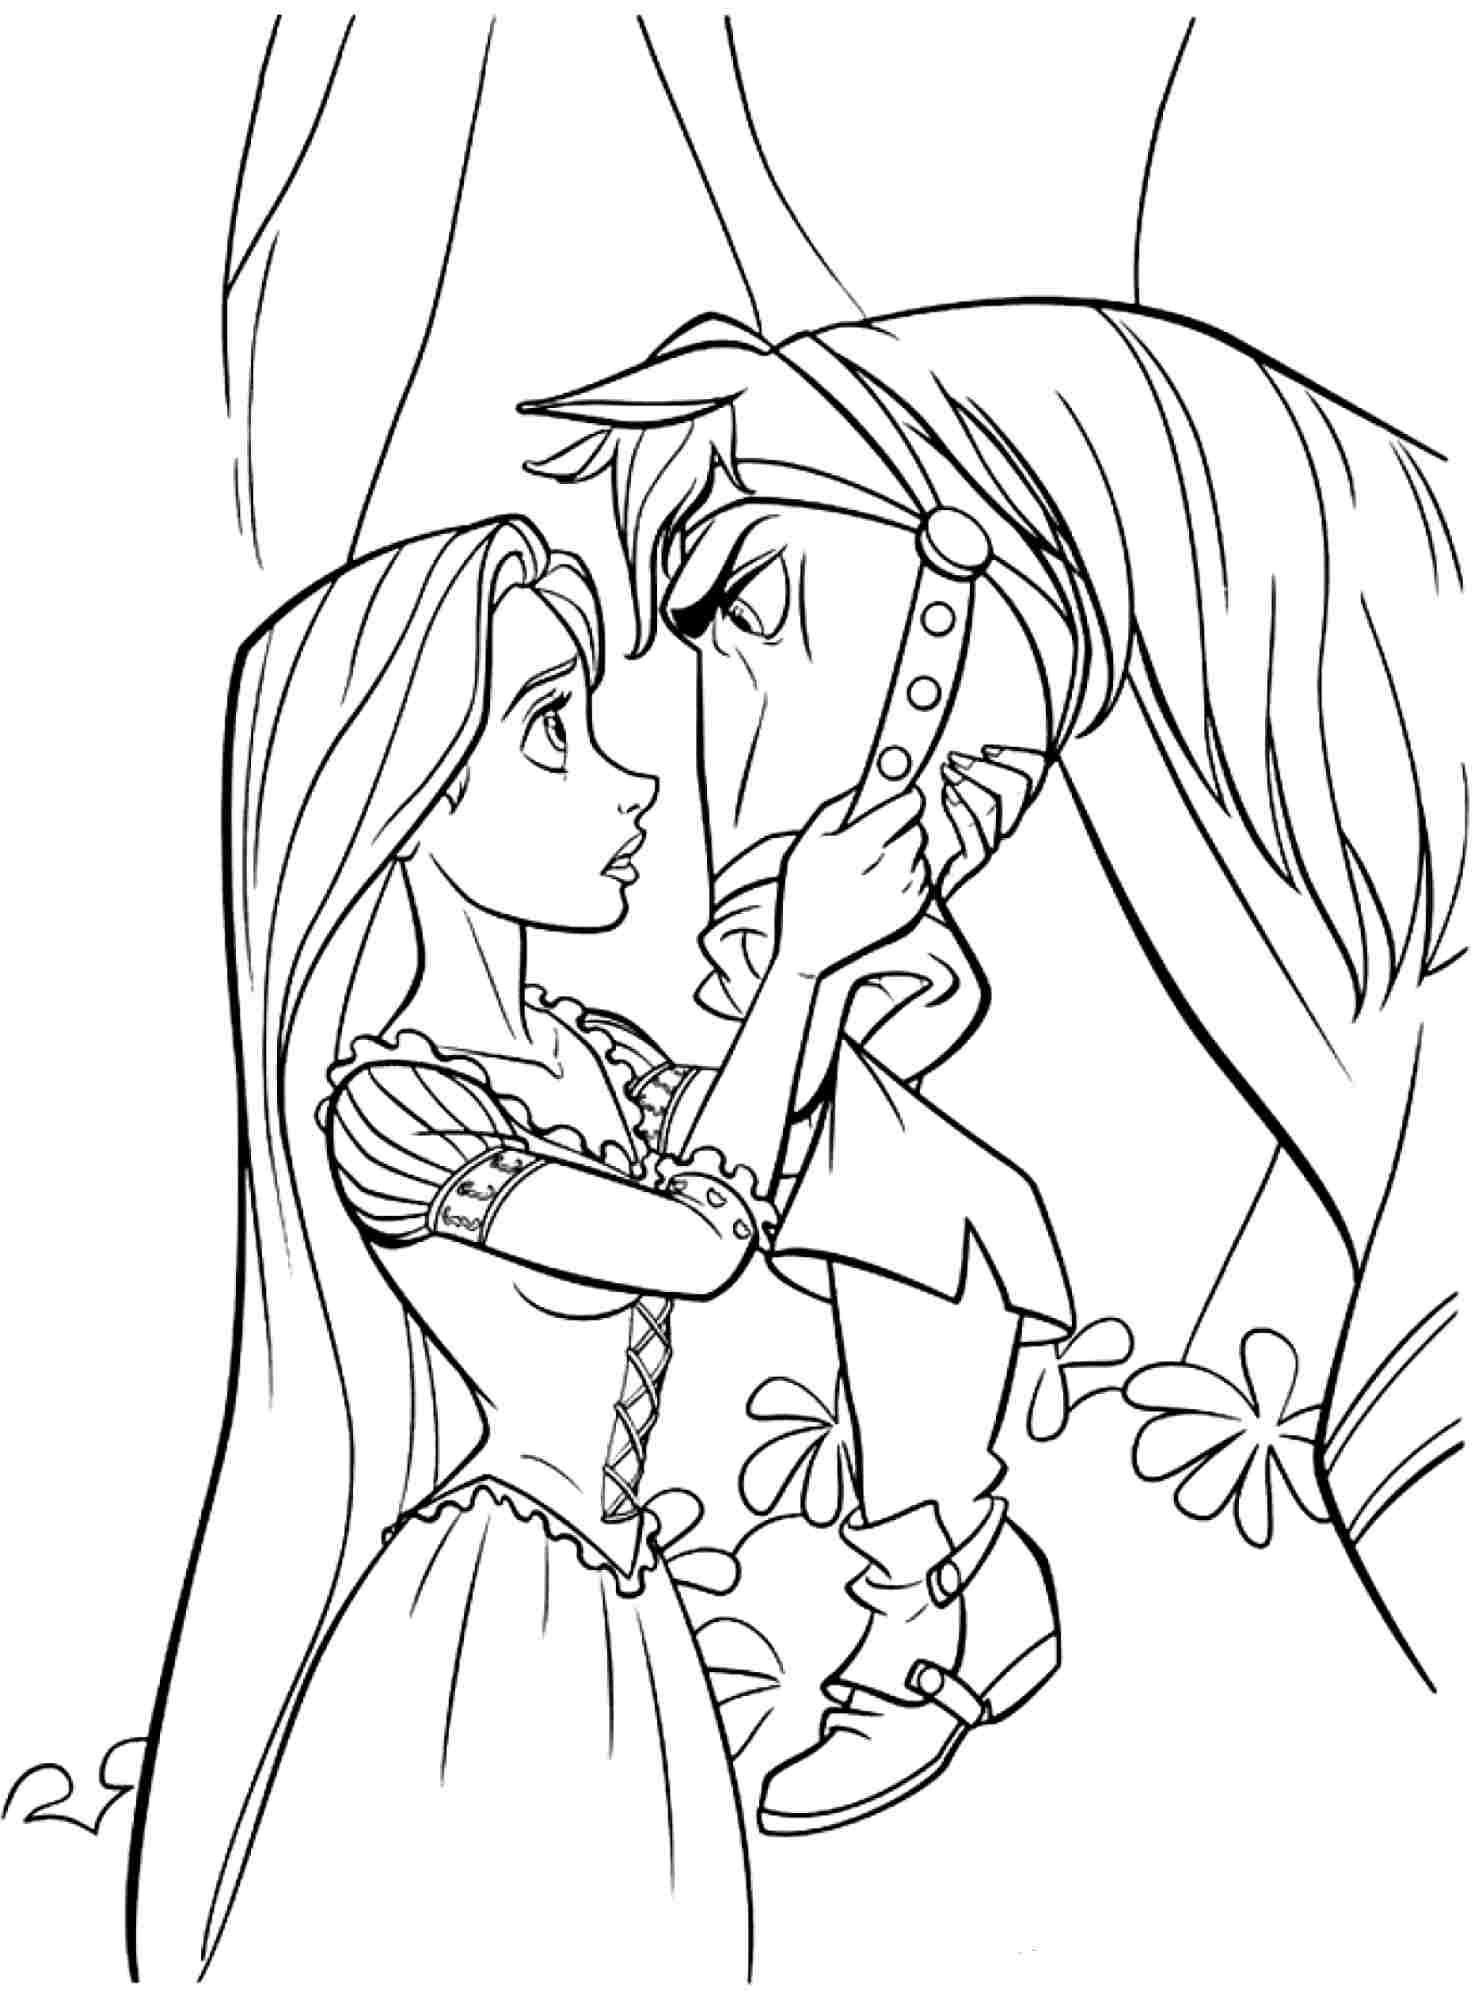 Coloring Sheets For Boys Disney
 free disney princess tangled rapunzel coloring sheets for